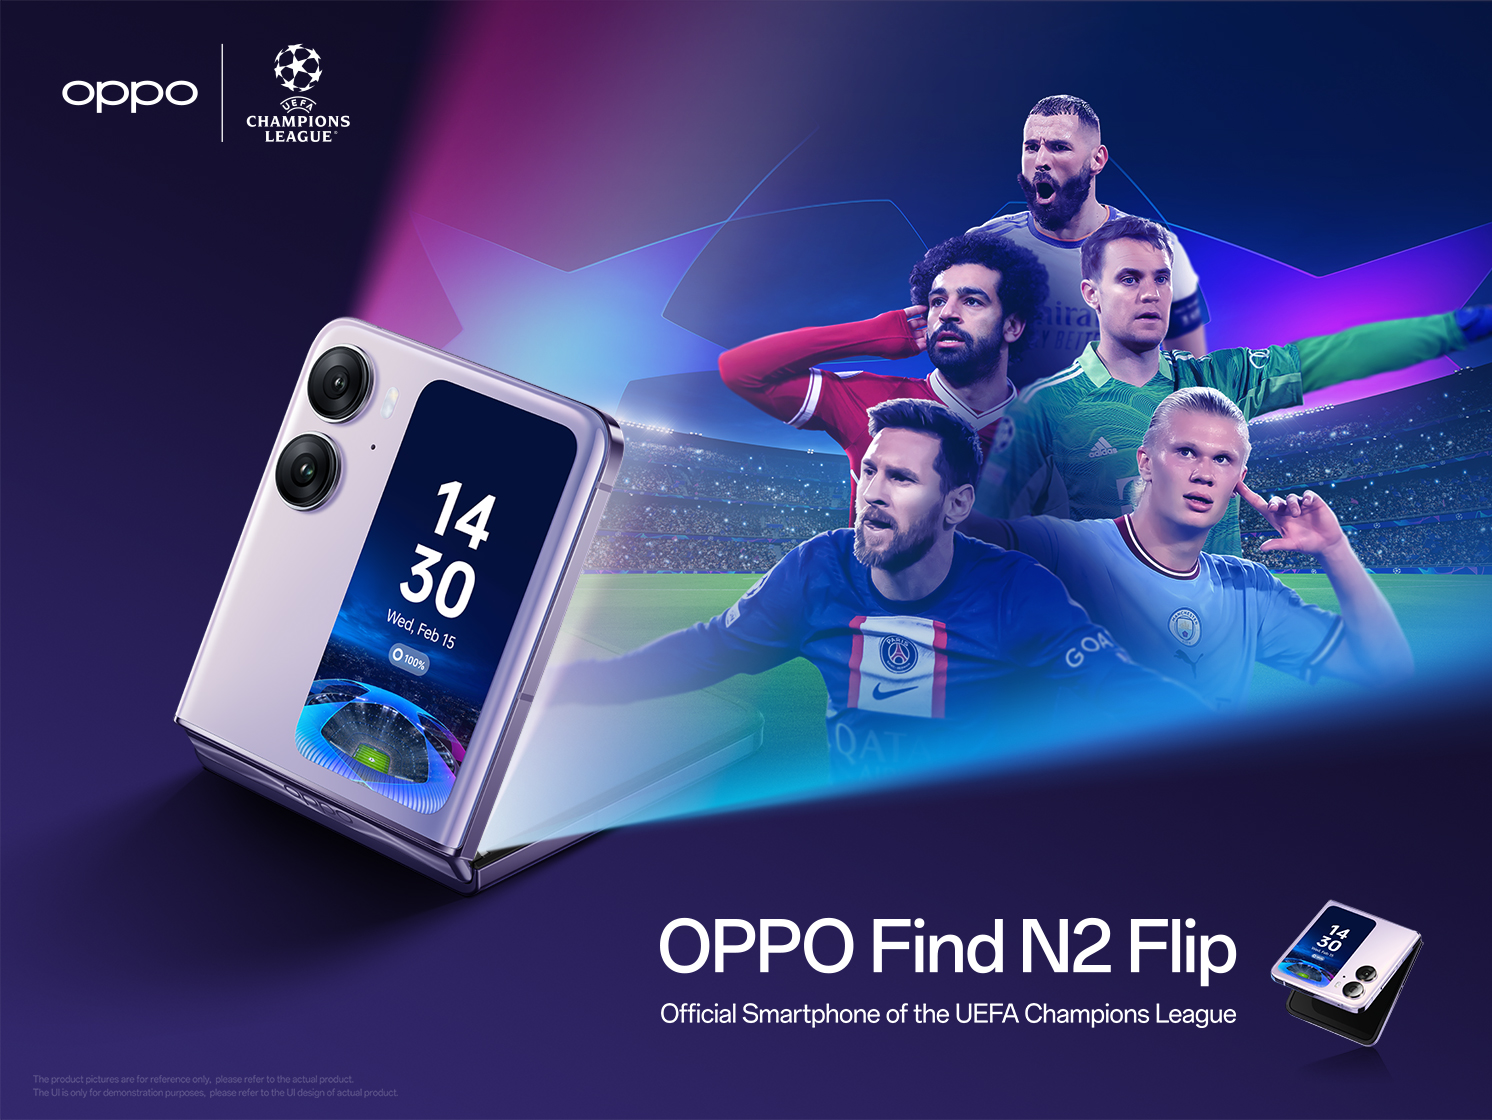 OPPO Globally Launched Its New Find N2 Flip, Official Smartphone of the  UEFA Champions League